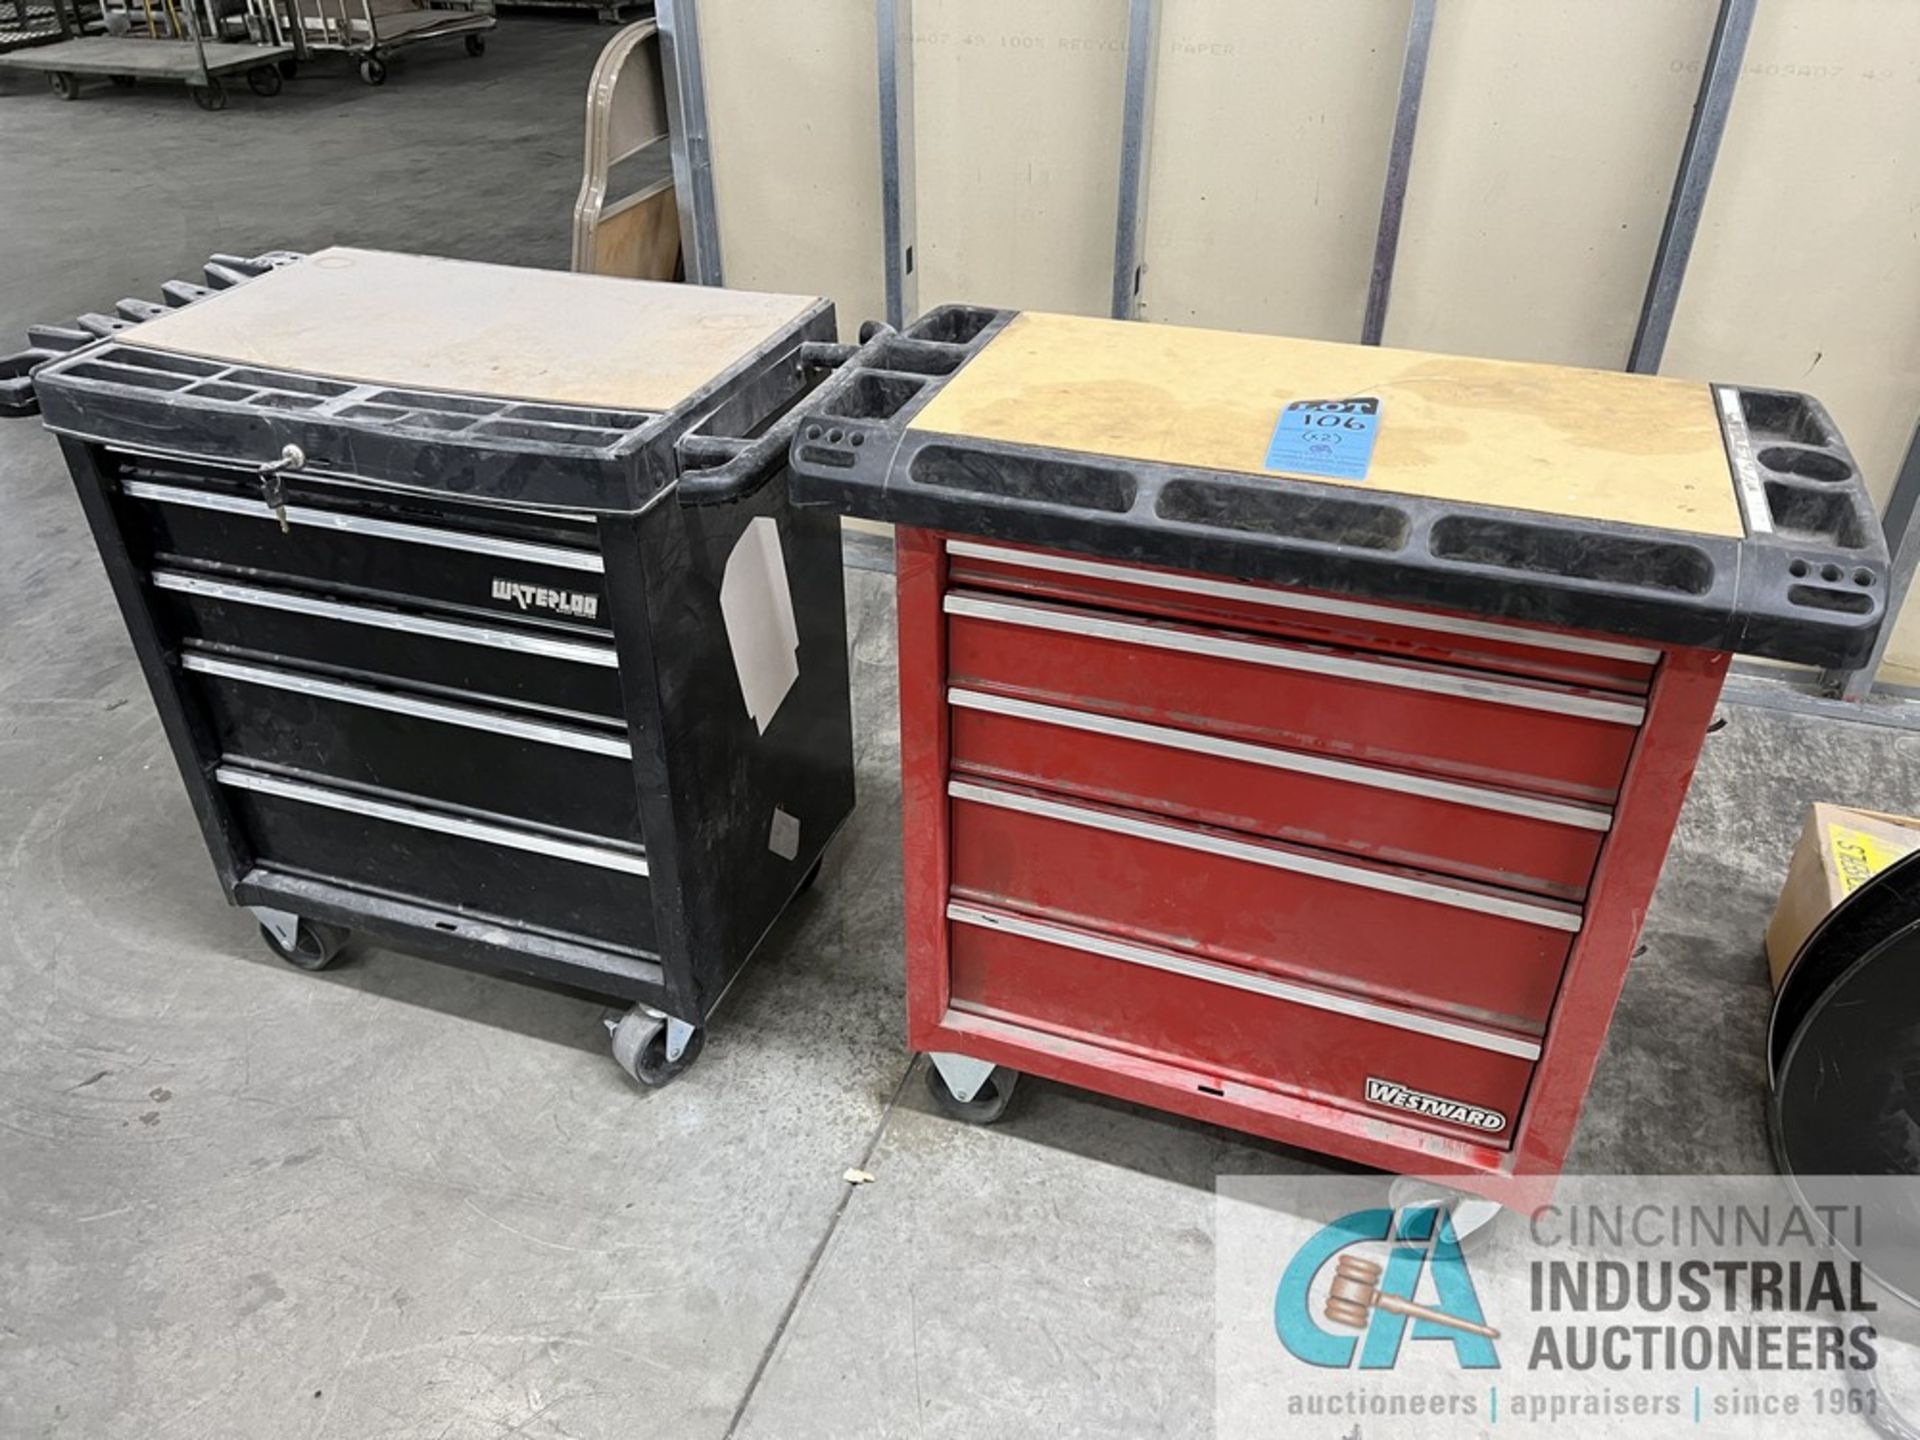 PORTABLE TOOLBOXES WITH MISCELLANEOUS TOOLS